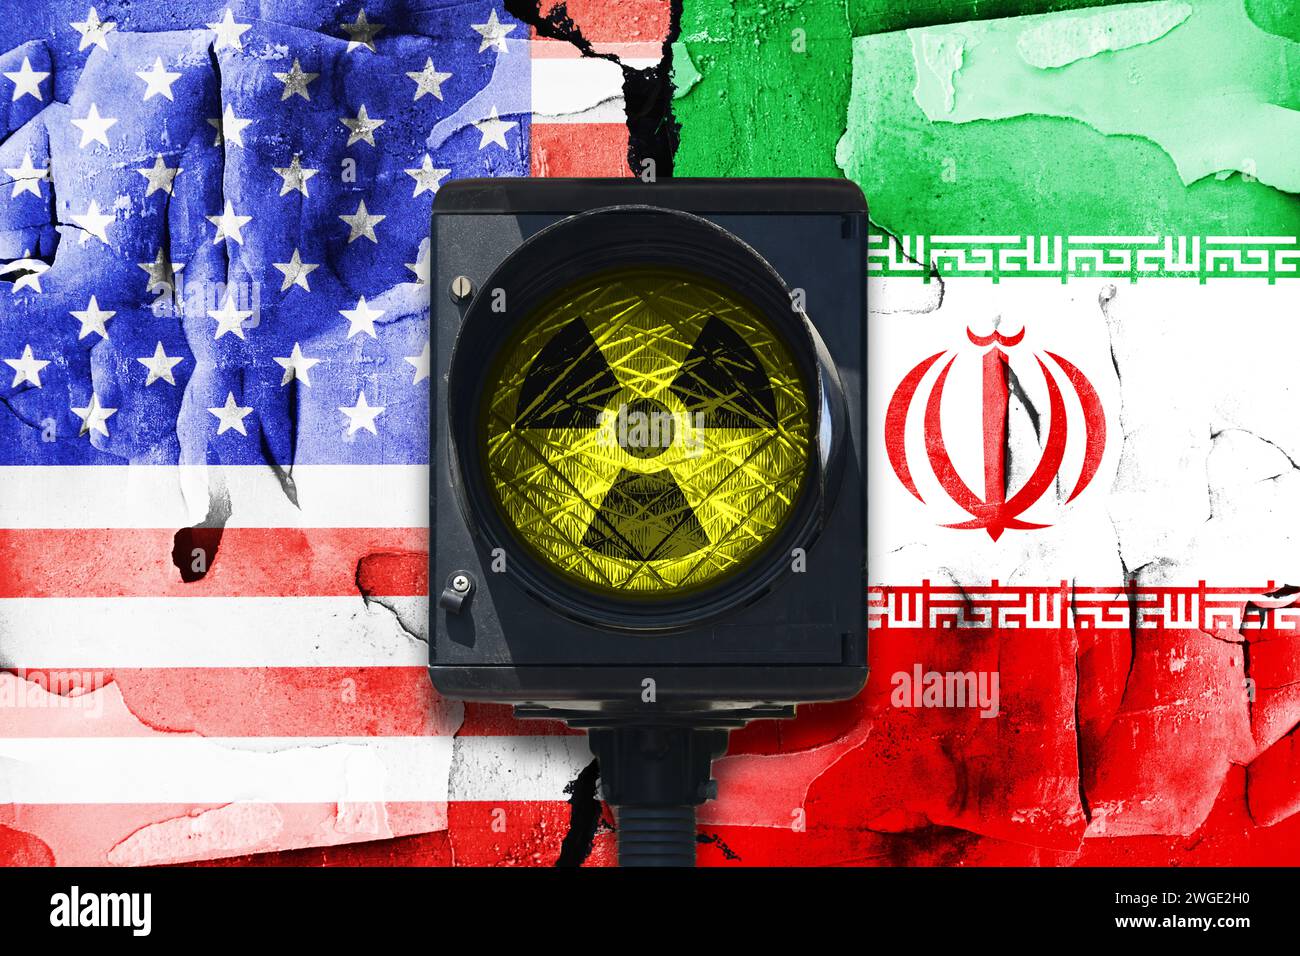 Flags Of The United States And Iran With Crack And Warning Light With Radioactivity Signs, Photomontage Stock Photo